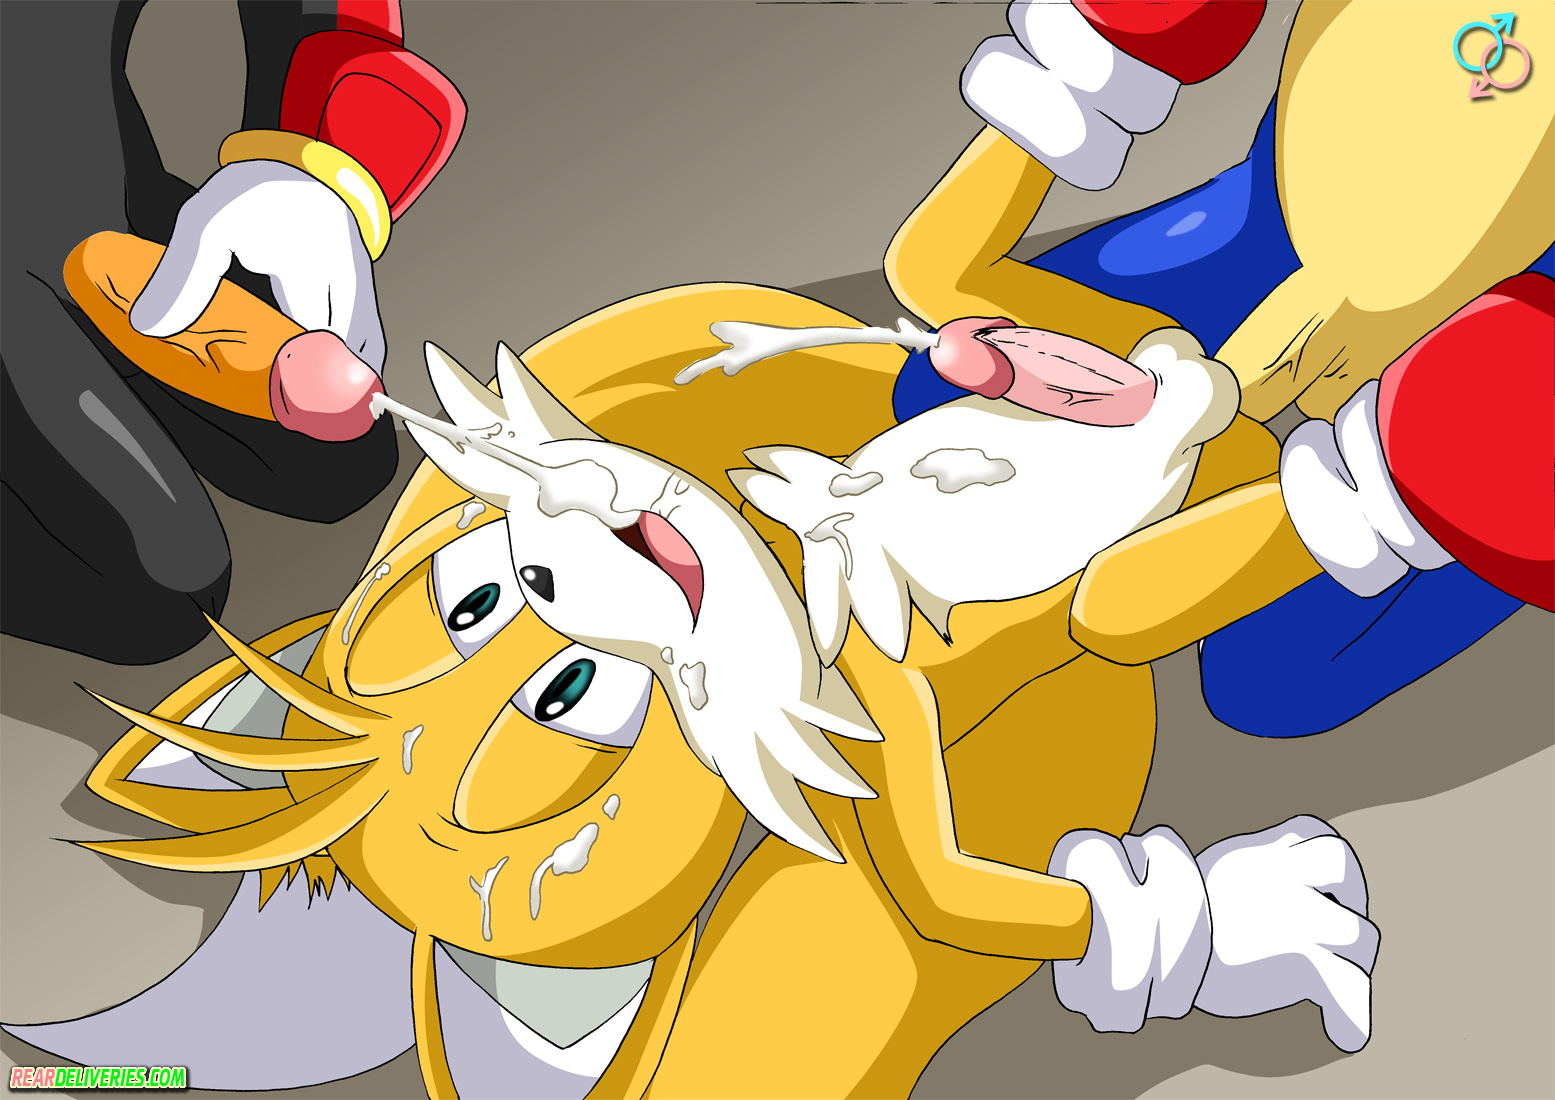 Explore the erotic world of sonic and tails gay porn with thrilling images